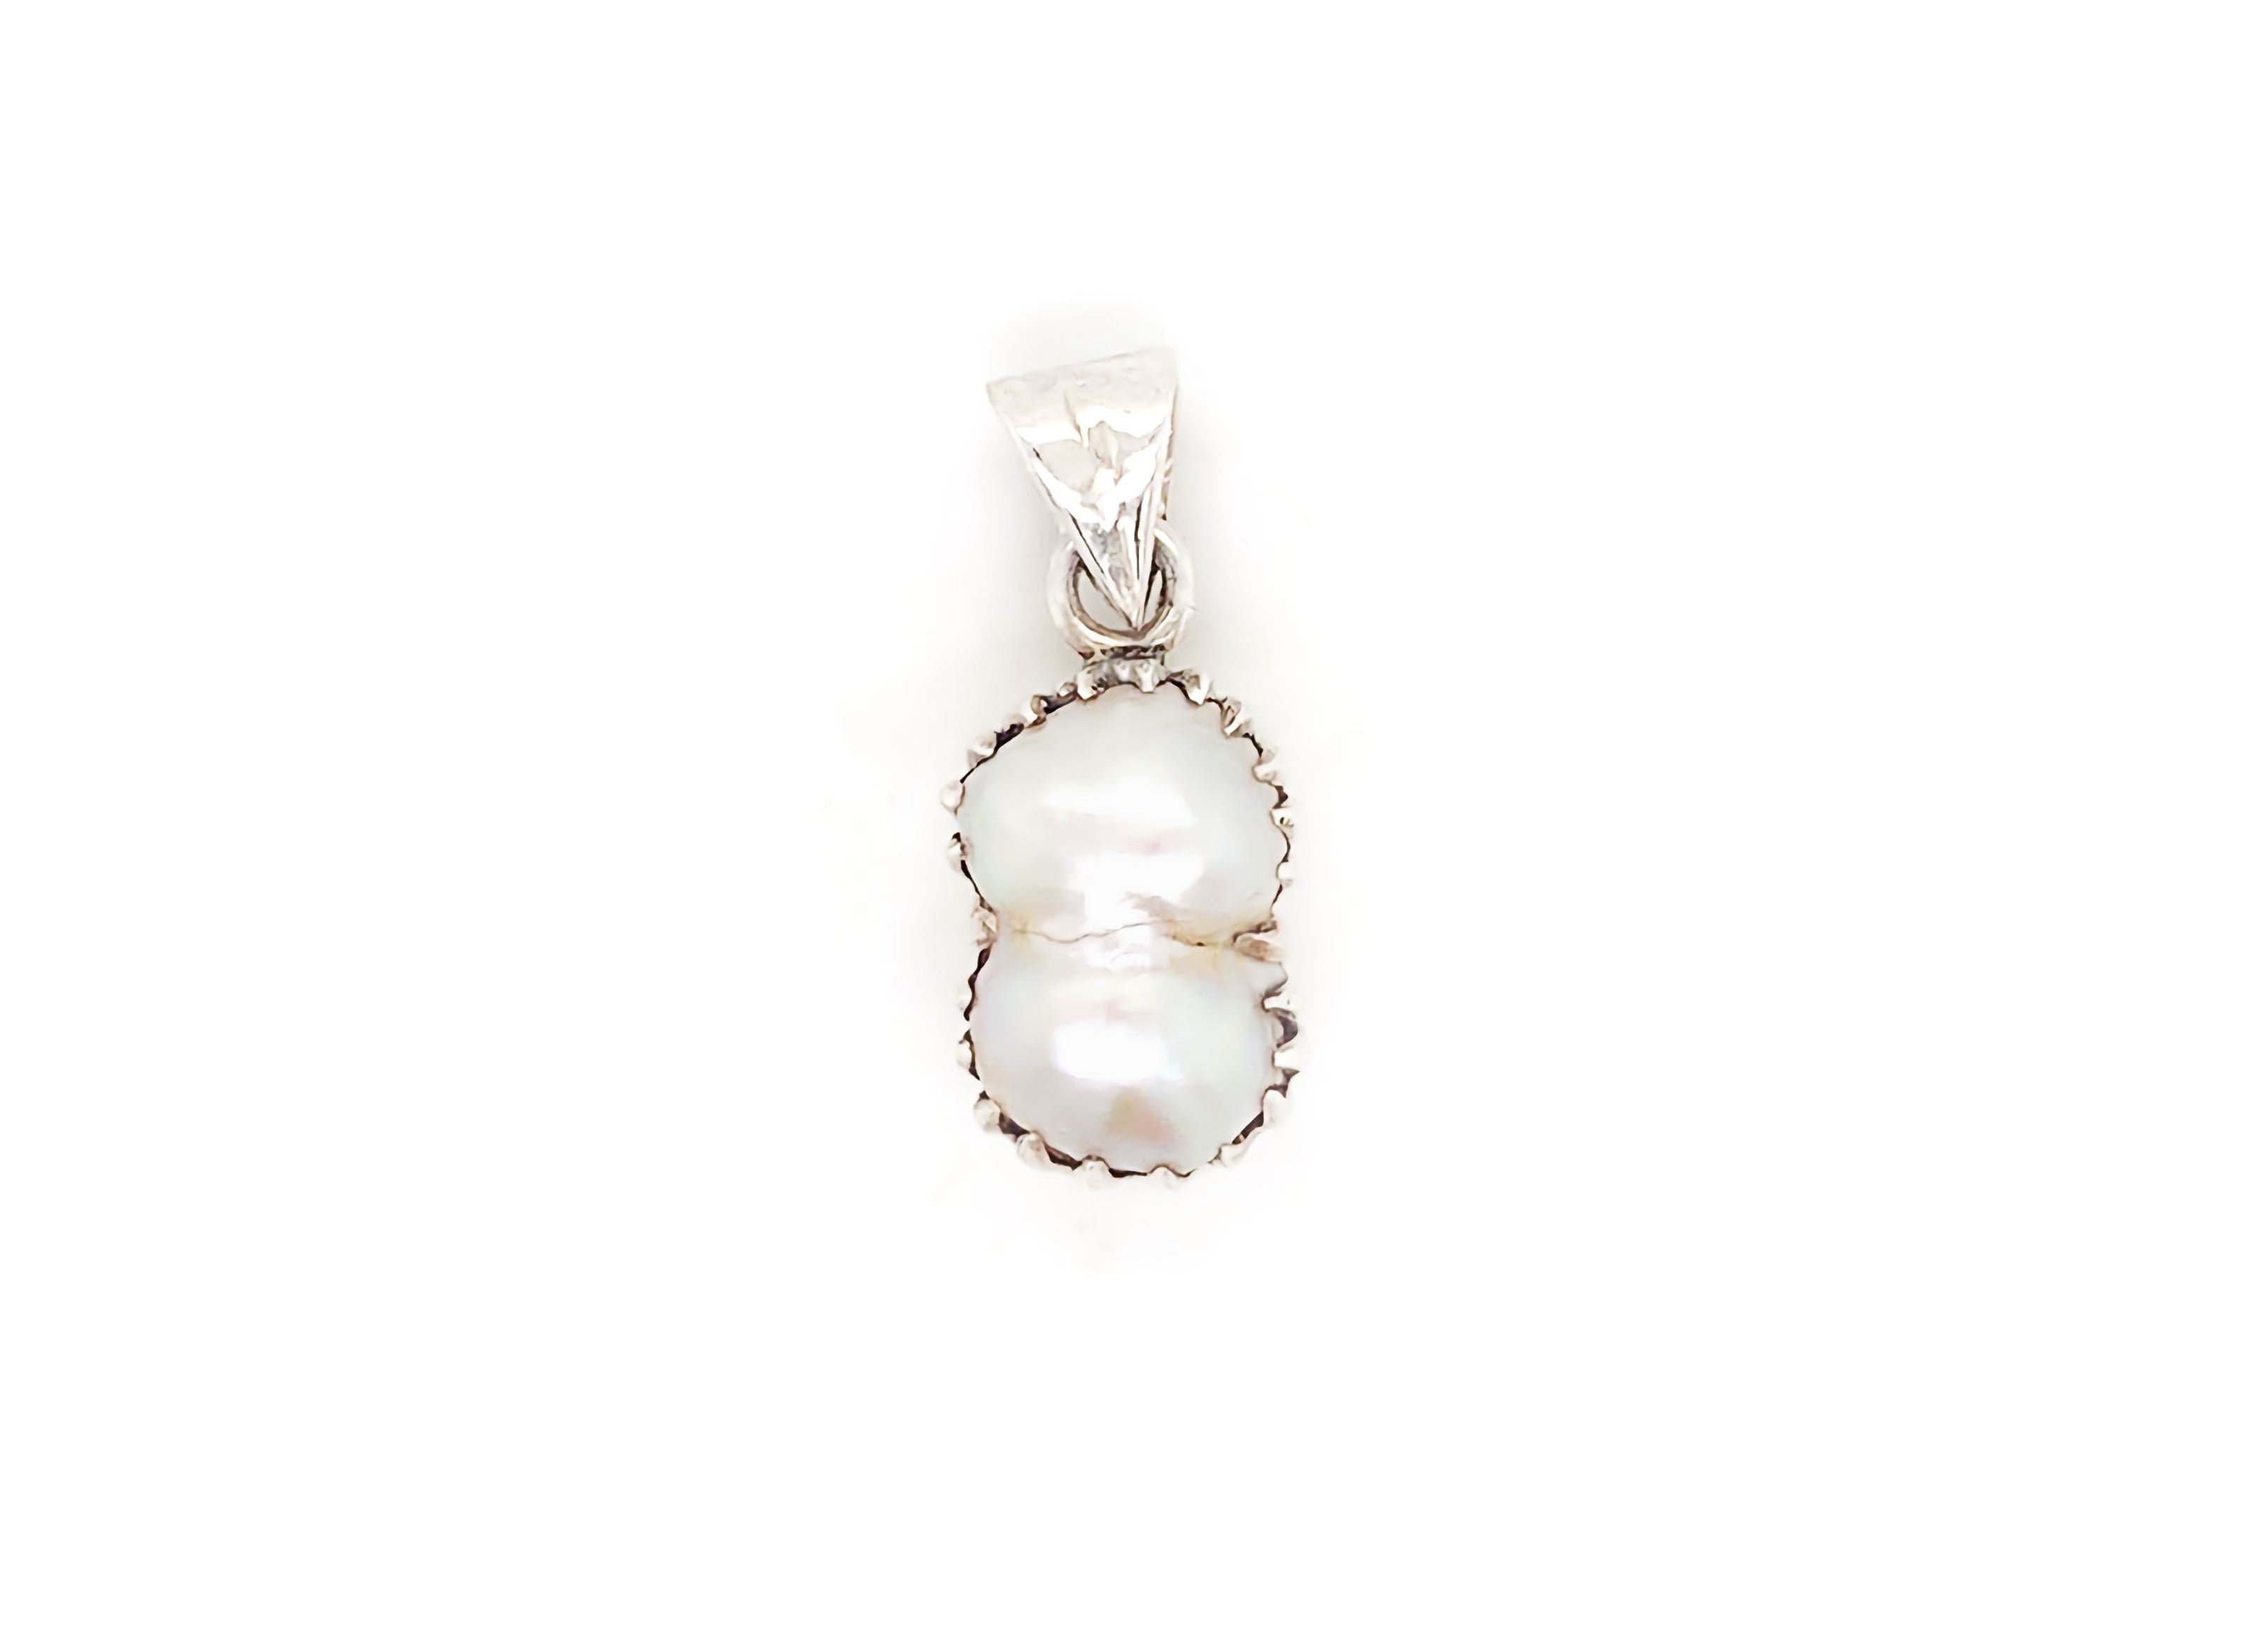 A gorgeous sterling silver baroque pearl set in a abstarct claw-like design.